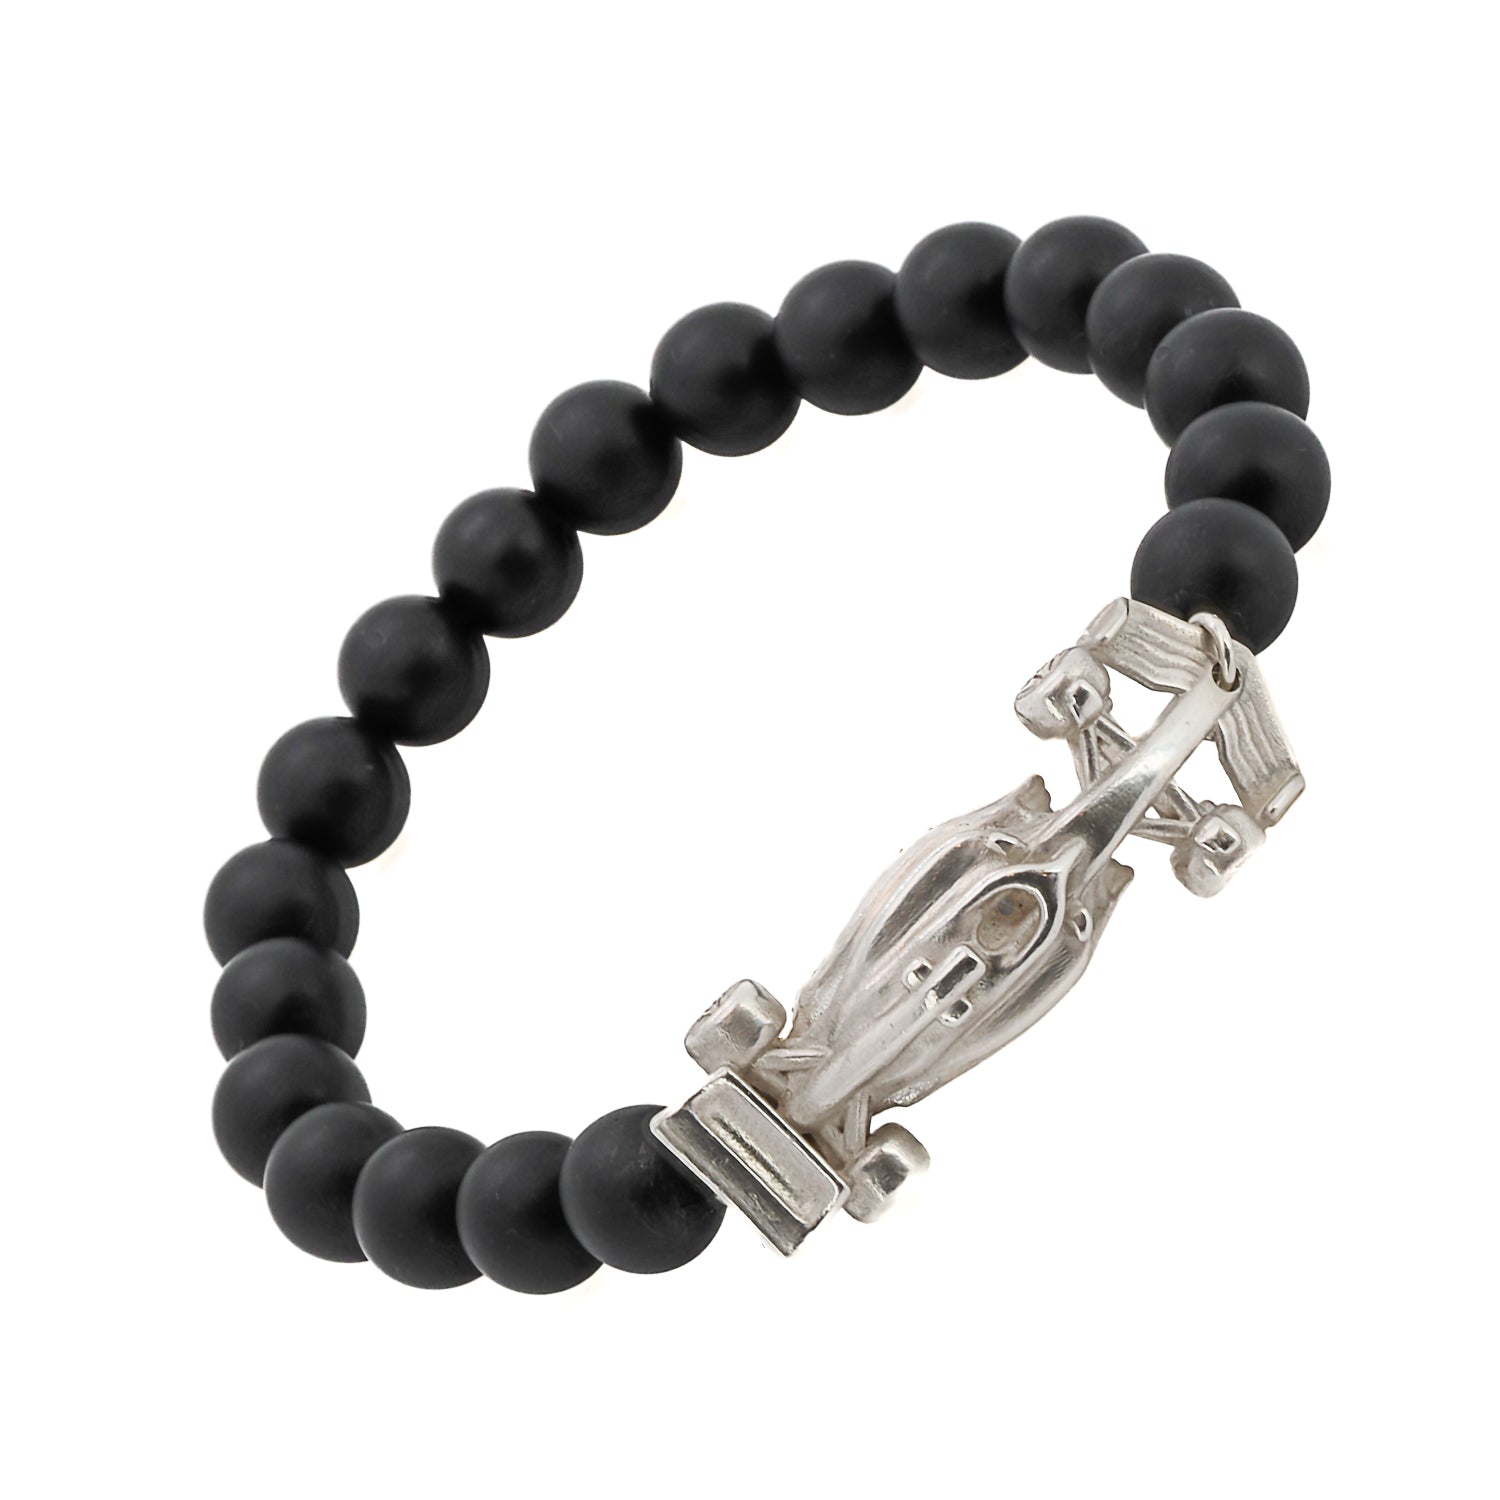 The Race Car Black Onyx Bracelet is a stylish and sleek piece of jewelry that is perfect for those who love cars or racing. It is made from black onyx beads and features a small silver race car charm. The bracelet is stretchy and comfortable to wear, and can fit most wrist sizes. The black onyx beads are said to have protective energy and are believed to help with stress and anxiety. This bracelet is a great accessory for any car enthusiast or anyone who loves unique and trendy jewelry.